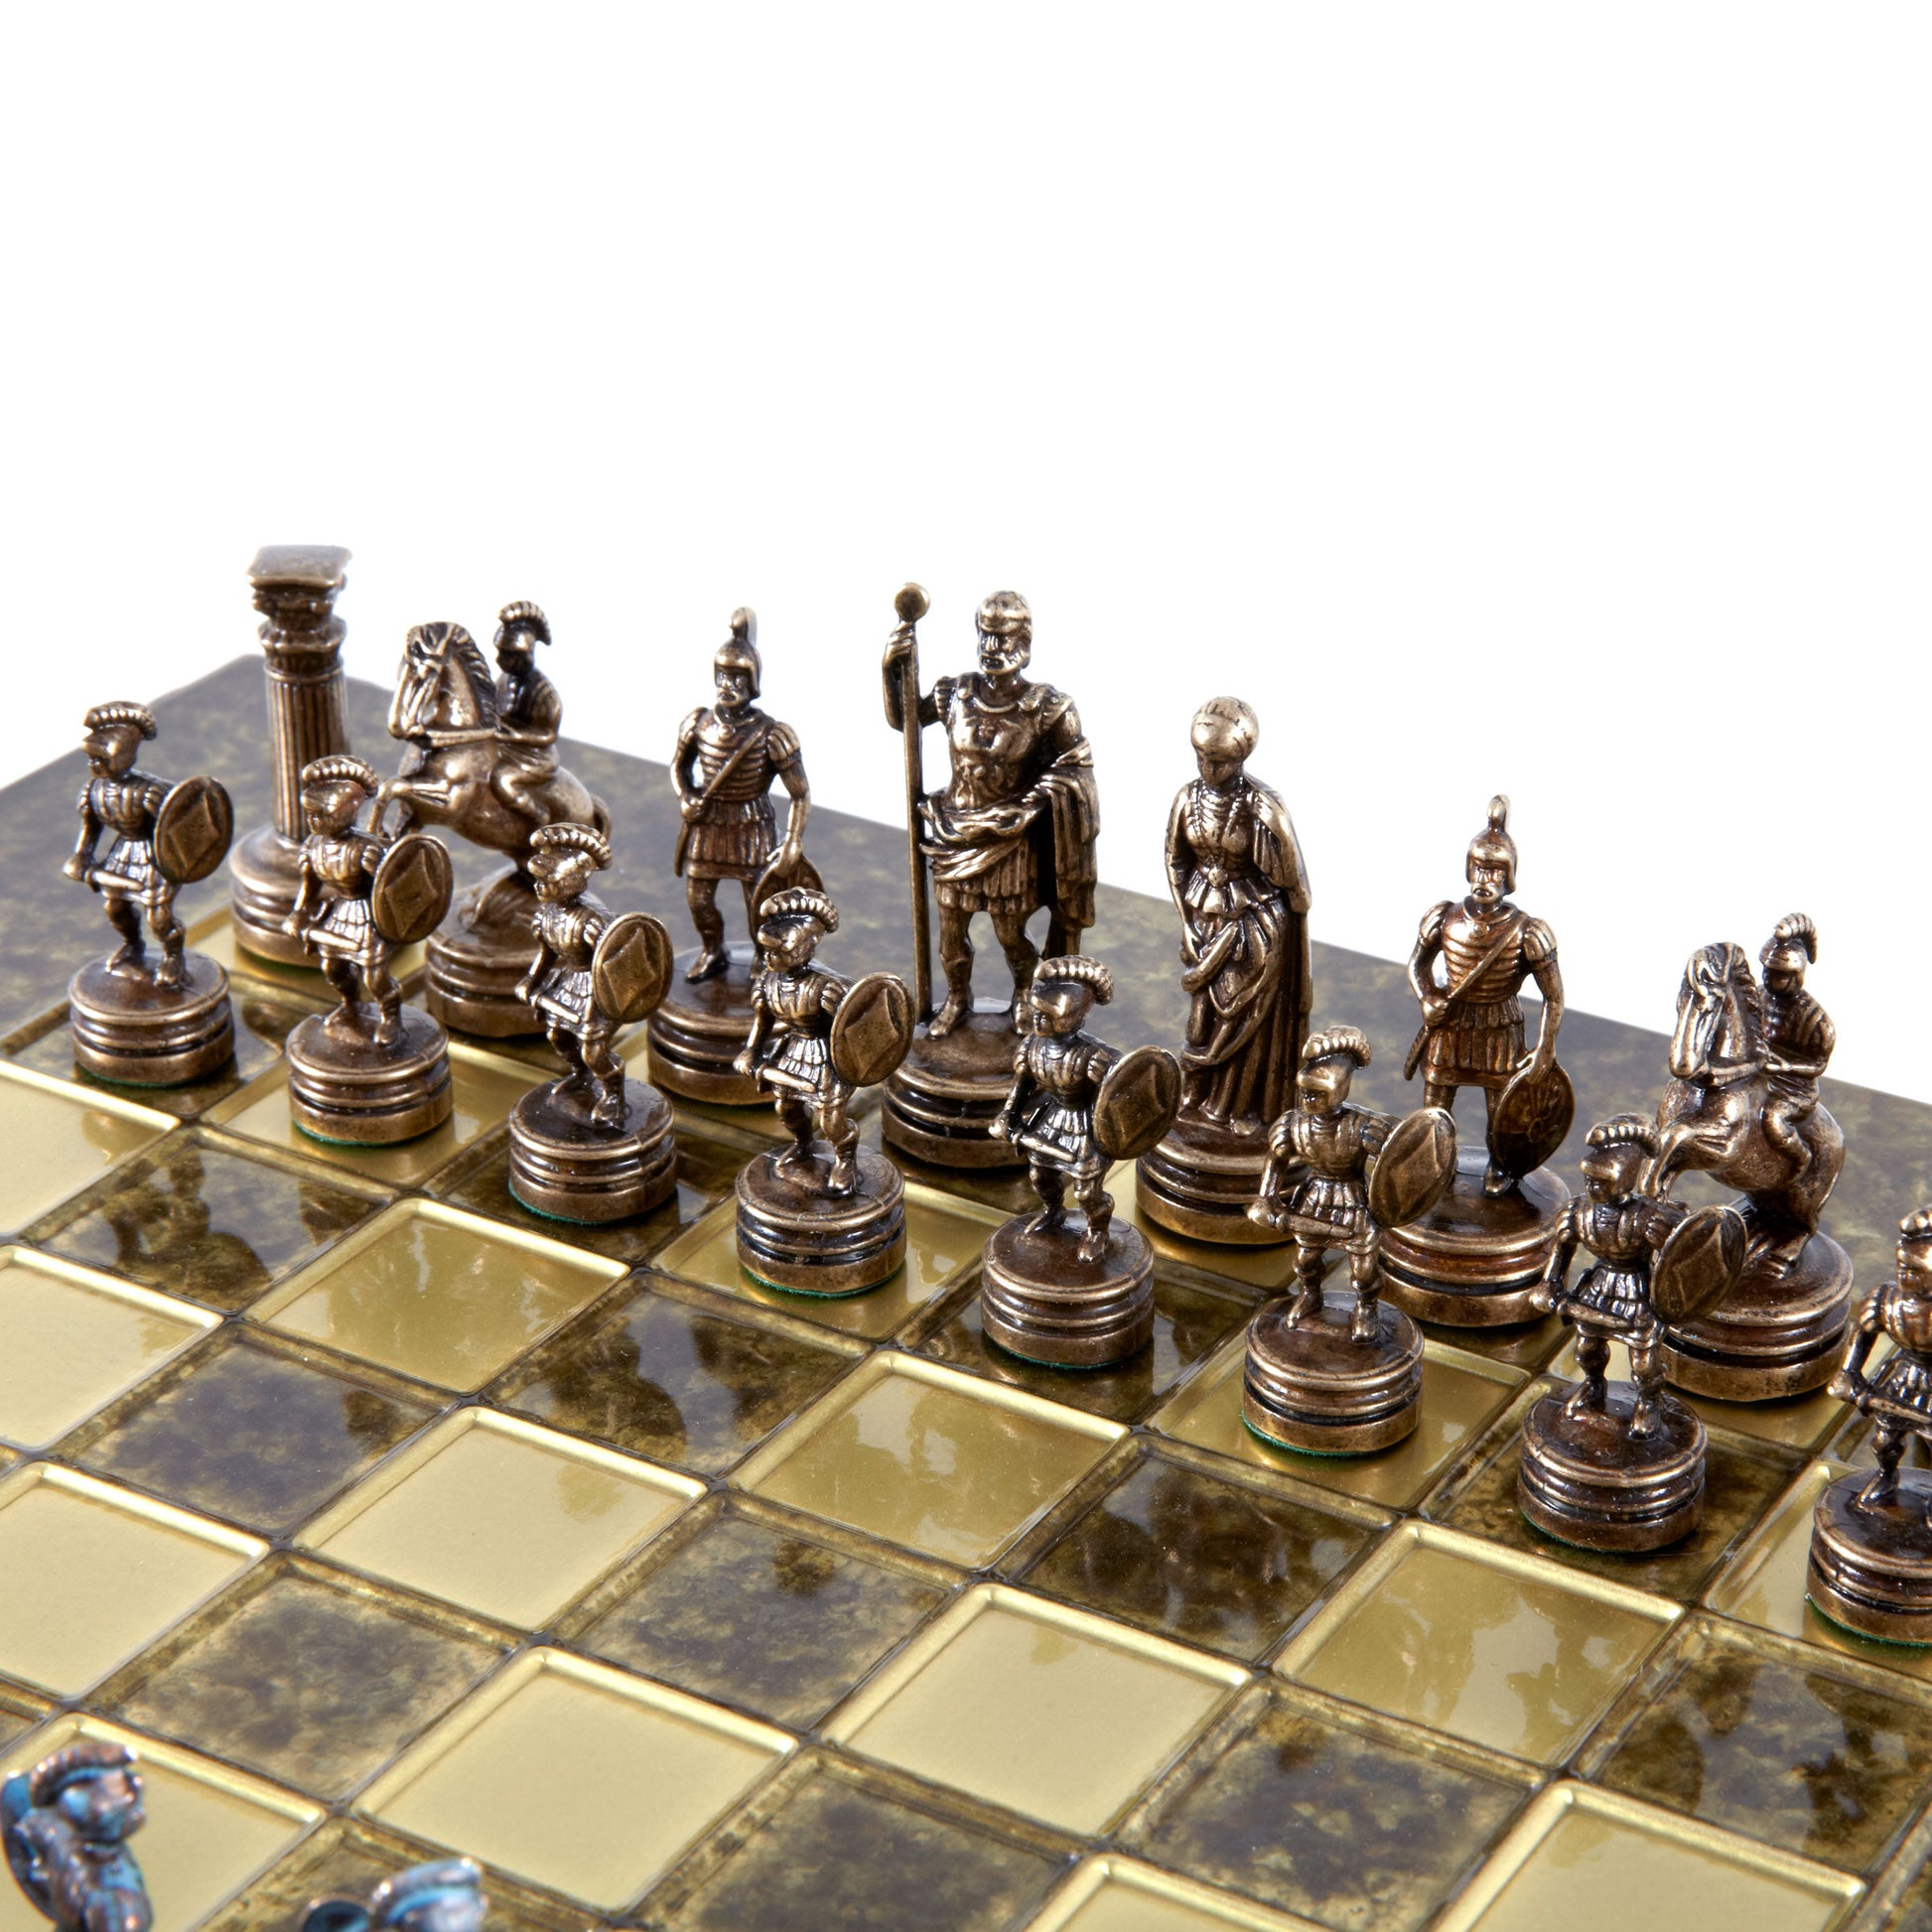 GREEK ROMAN PERIOD CHESS SET with blue/brown chessmen and bronze chessboard 28 x 28cm (Small) - Premium Chess from MANOPOULOS Chess & Backgammon - Just €163! Shop now at MANOPOULOS Chess & Backgammon